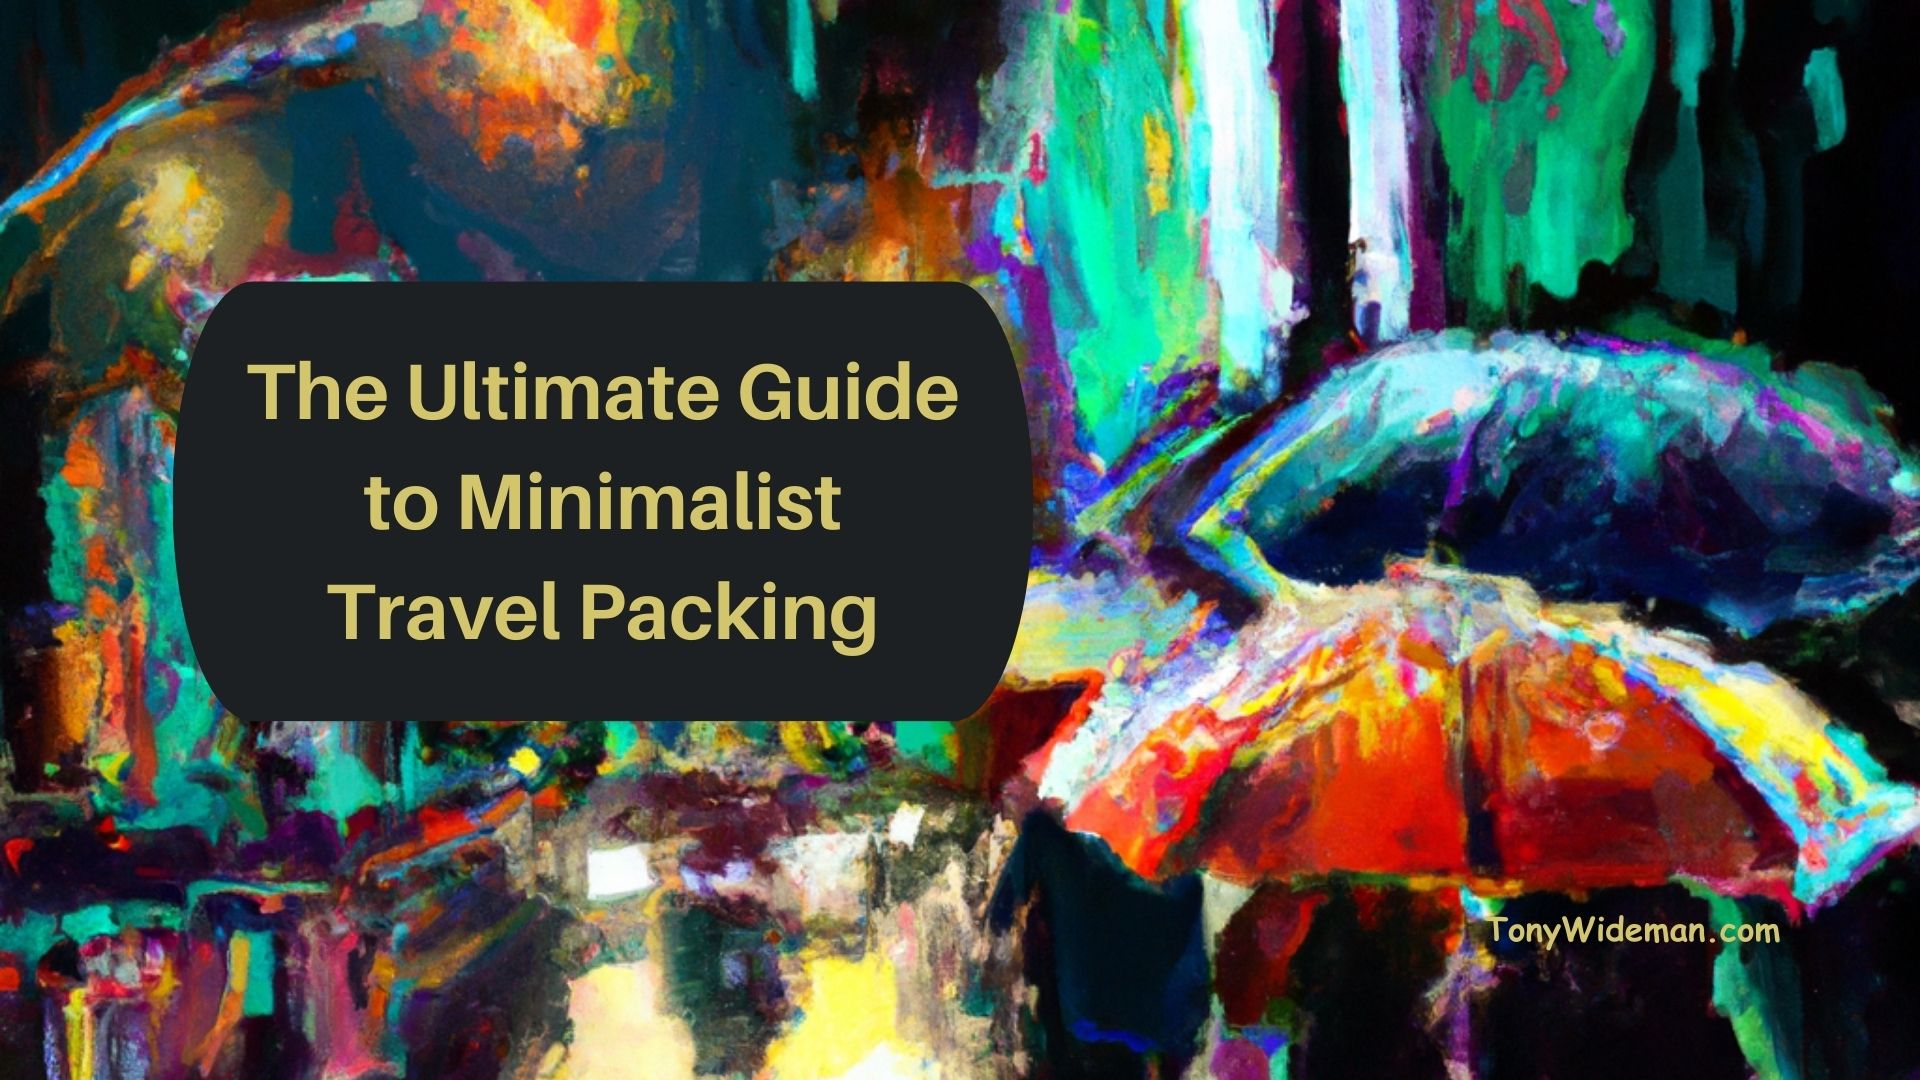 The Ultimate Guide to Minimalist Travel Packing